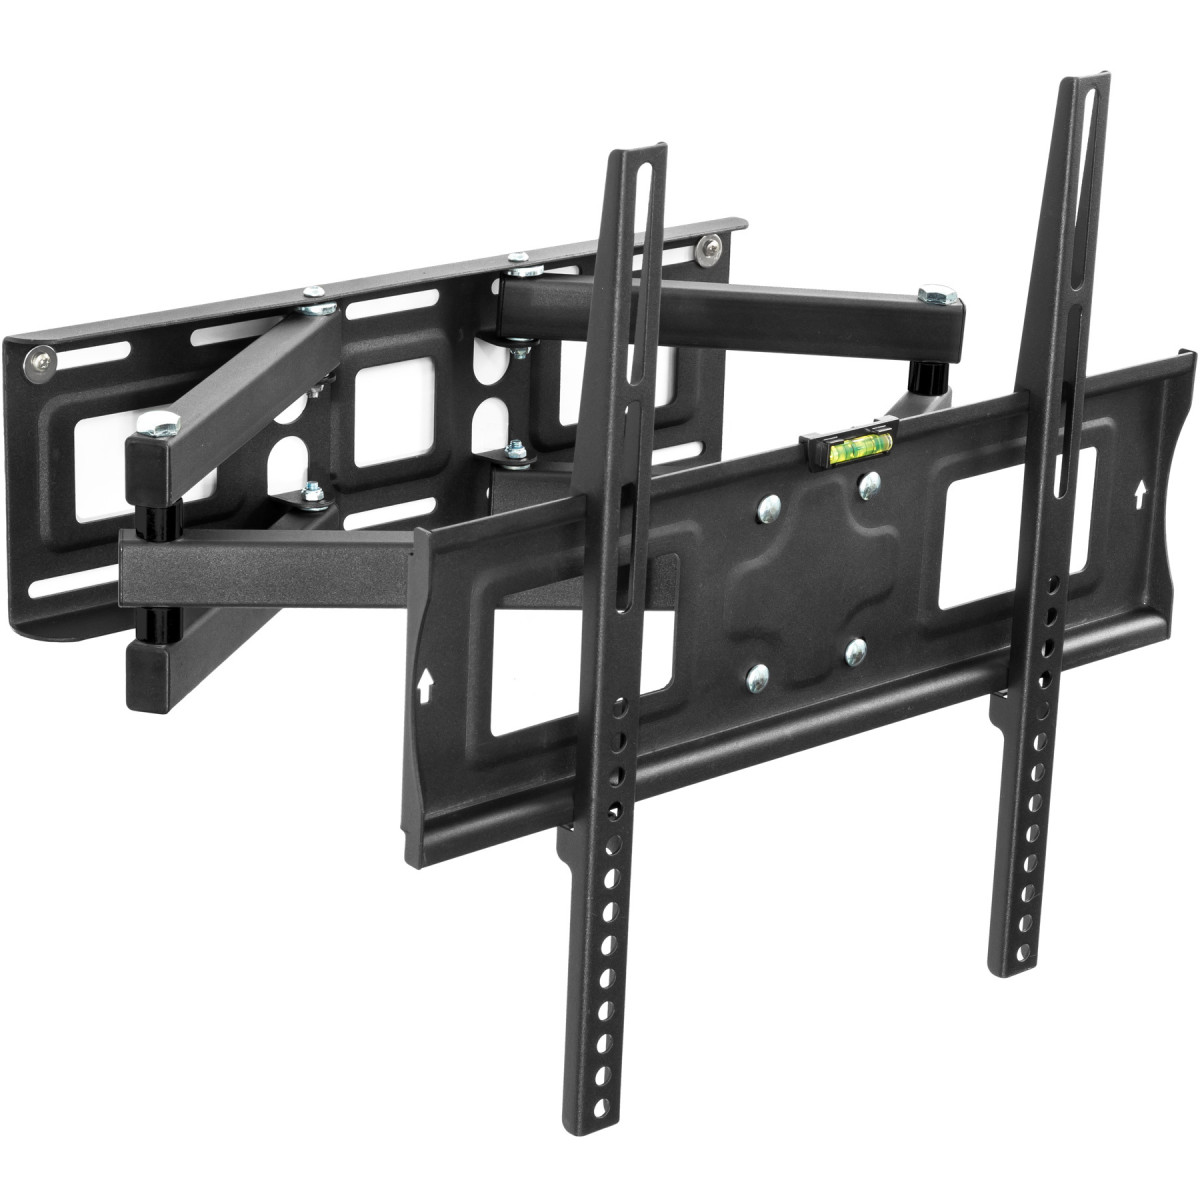 Support mural Tectake Support mural TV 26"- 55" orientable et inclinable, VESA max.: 400x400, max. 100kg